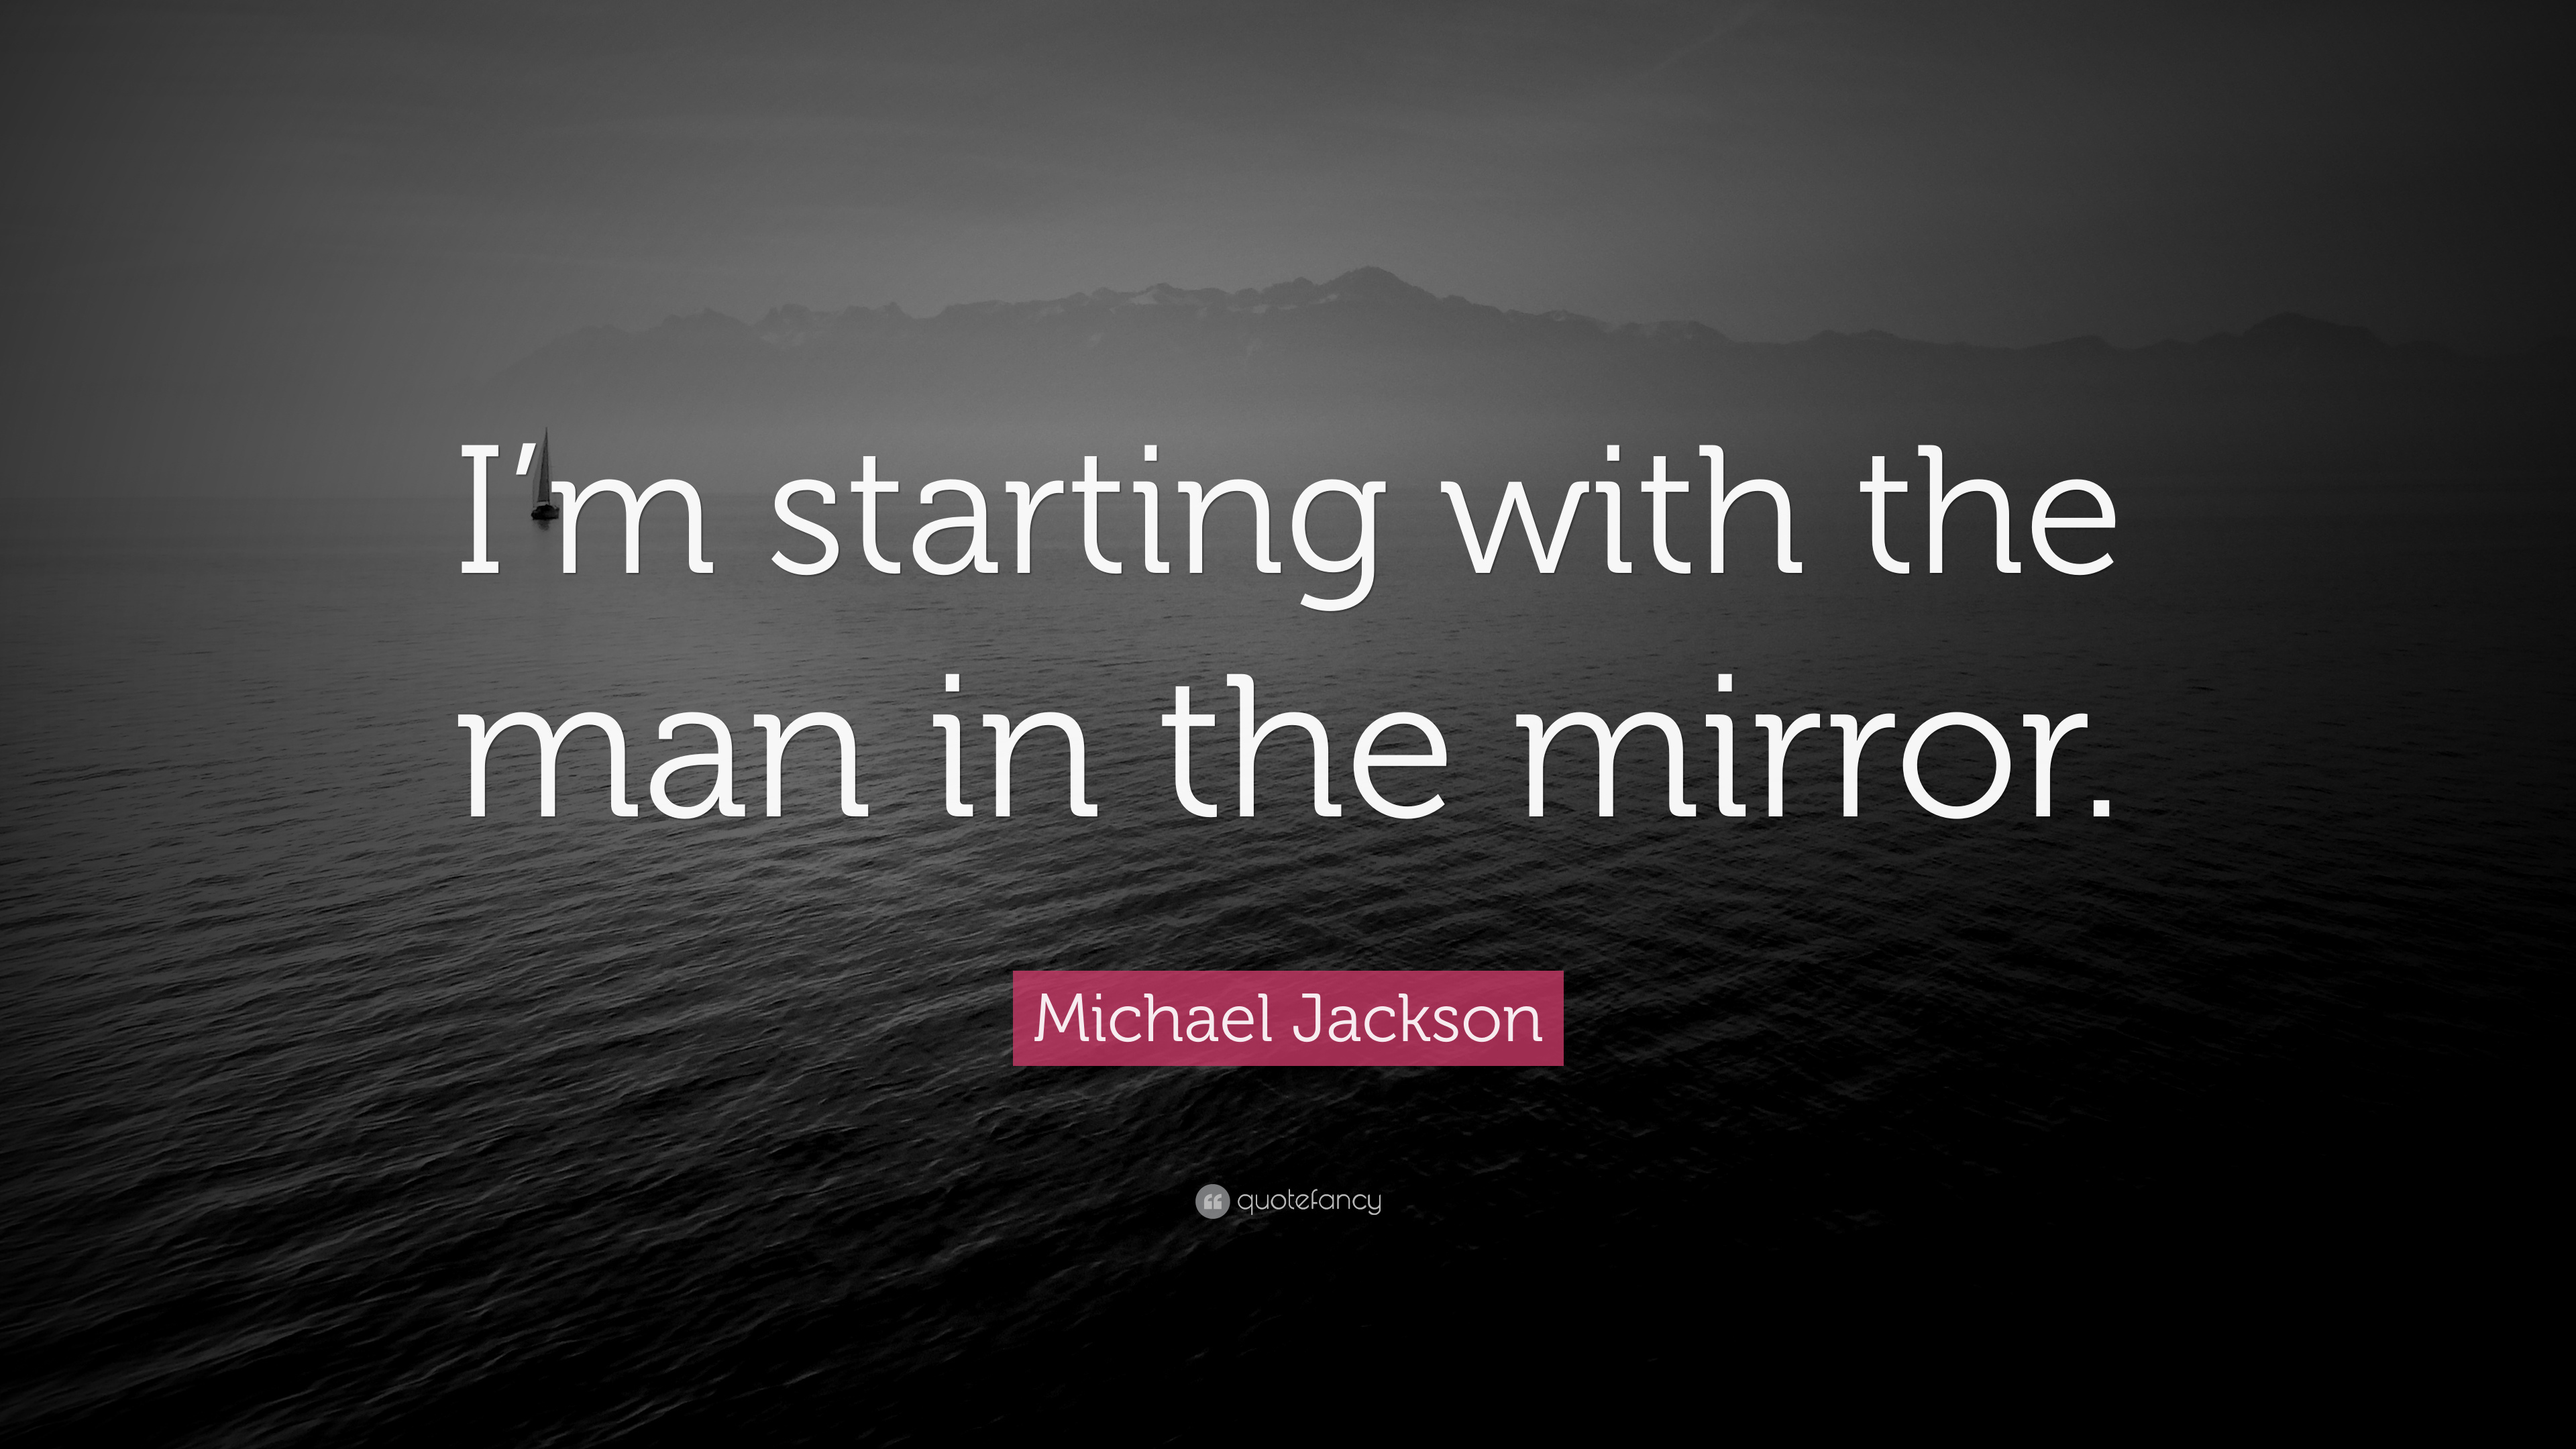 Michael Jackson Quote: “I'm starting with the man in the mirror